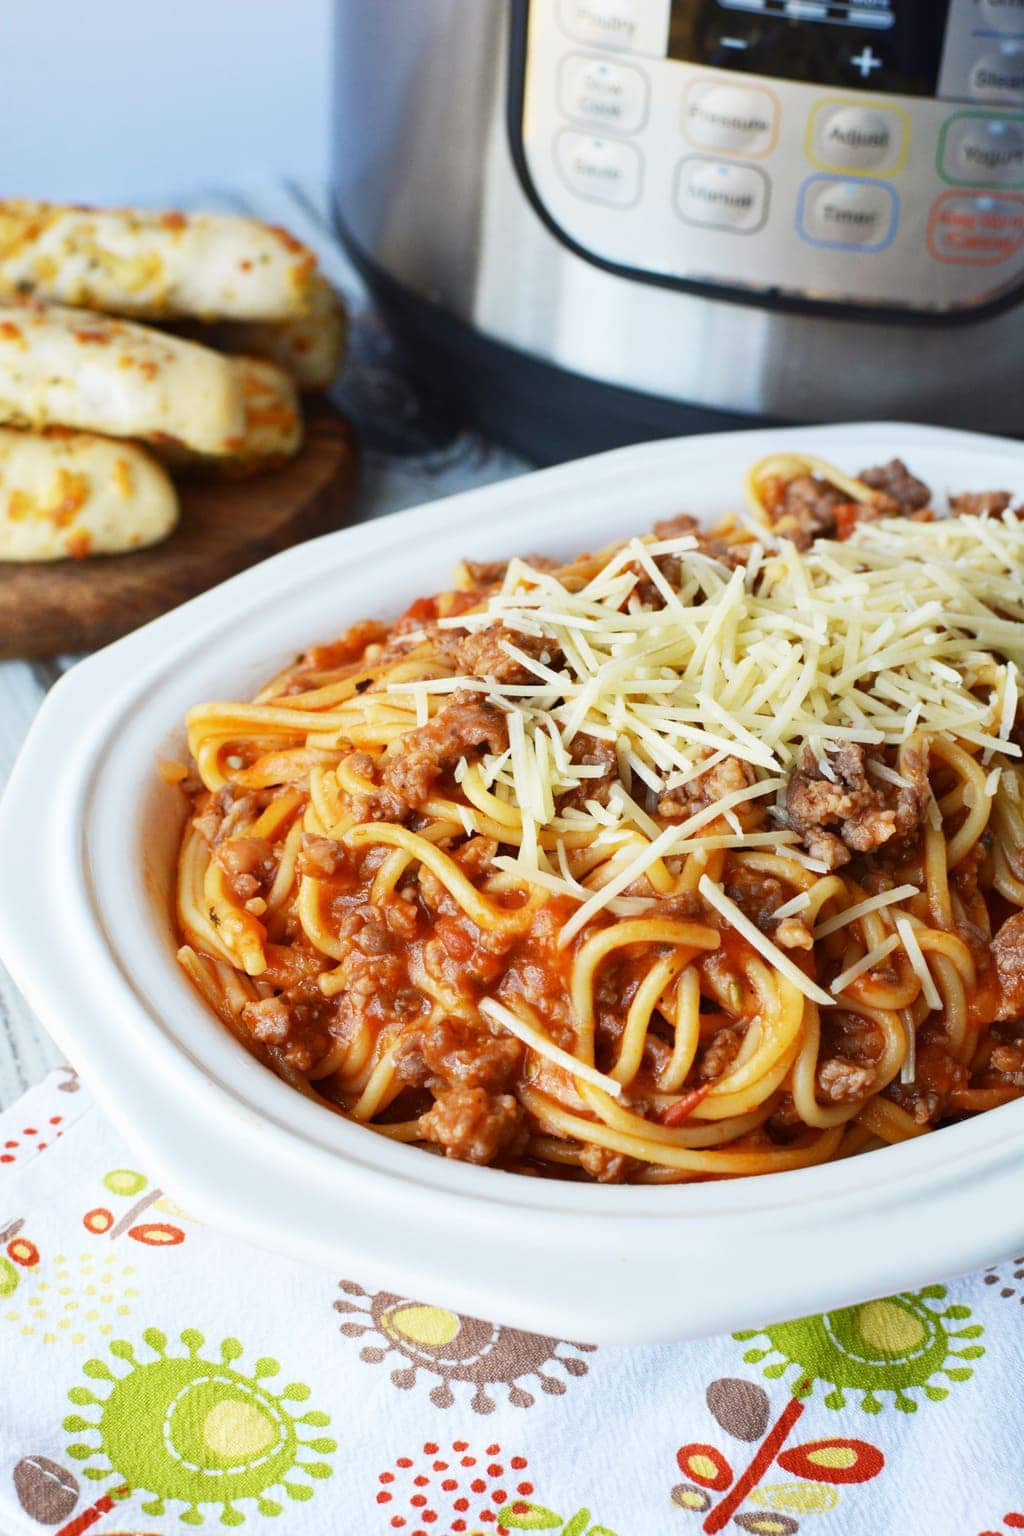 Spaghetti With Italian Sausage
 Easy Instant Pot Spaghetti With Italian Sausage Dinner